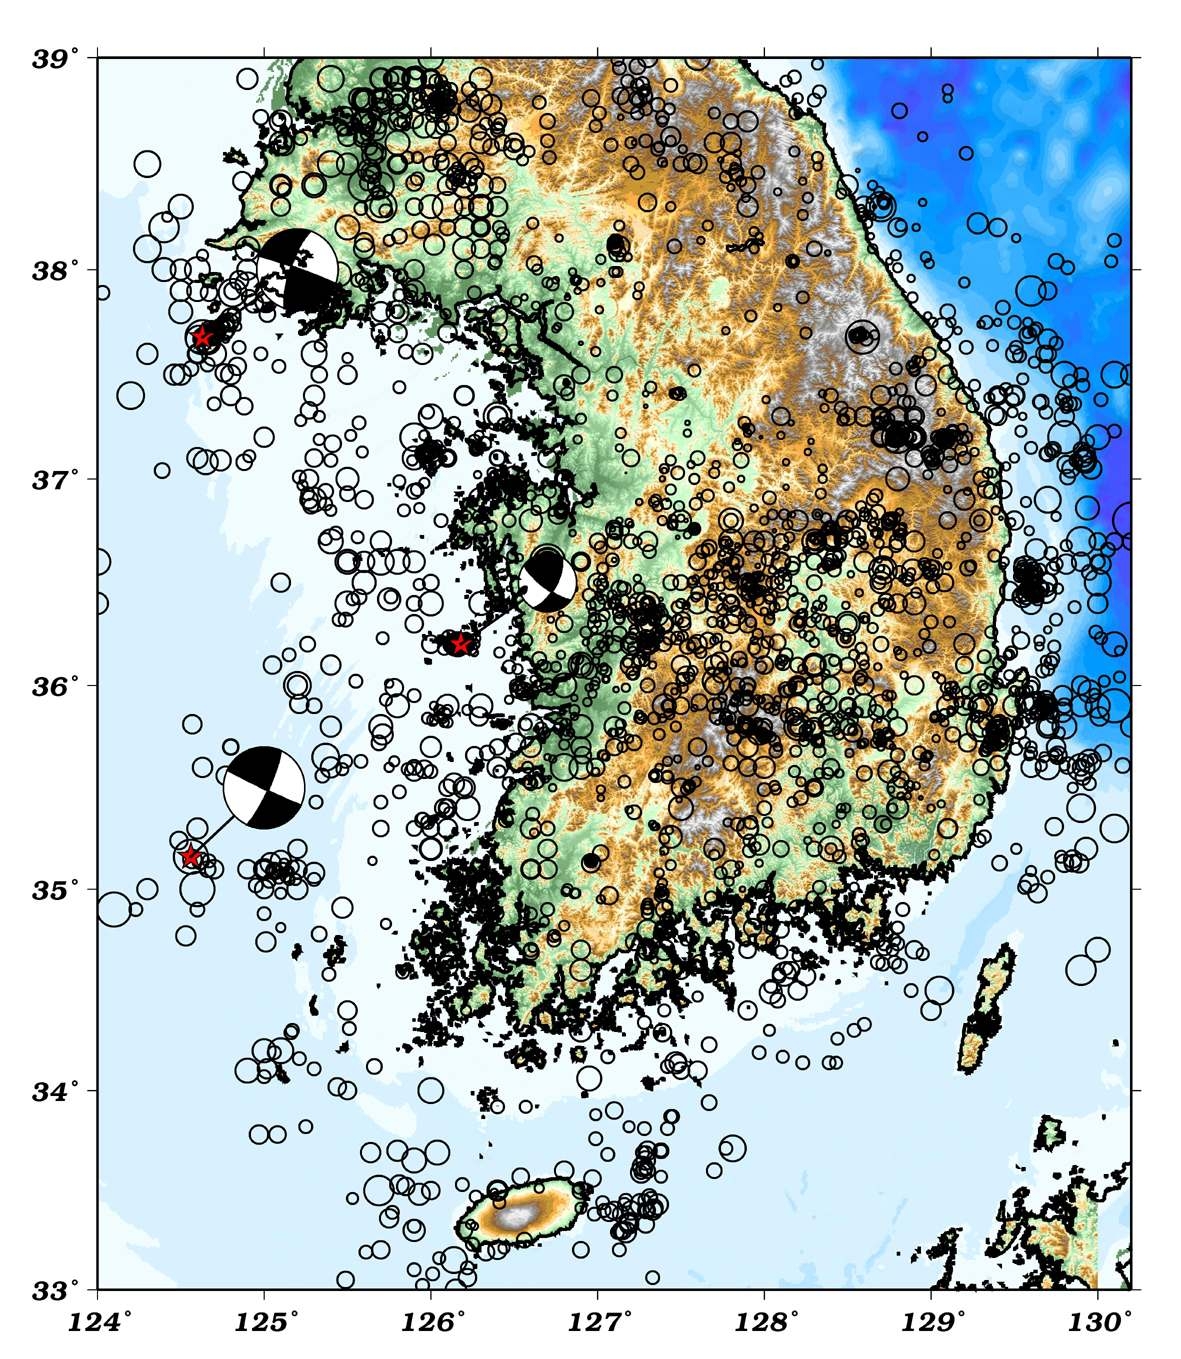 Distribution of earthquakes recorded recently in and around the Korean Peninsula.